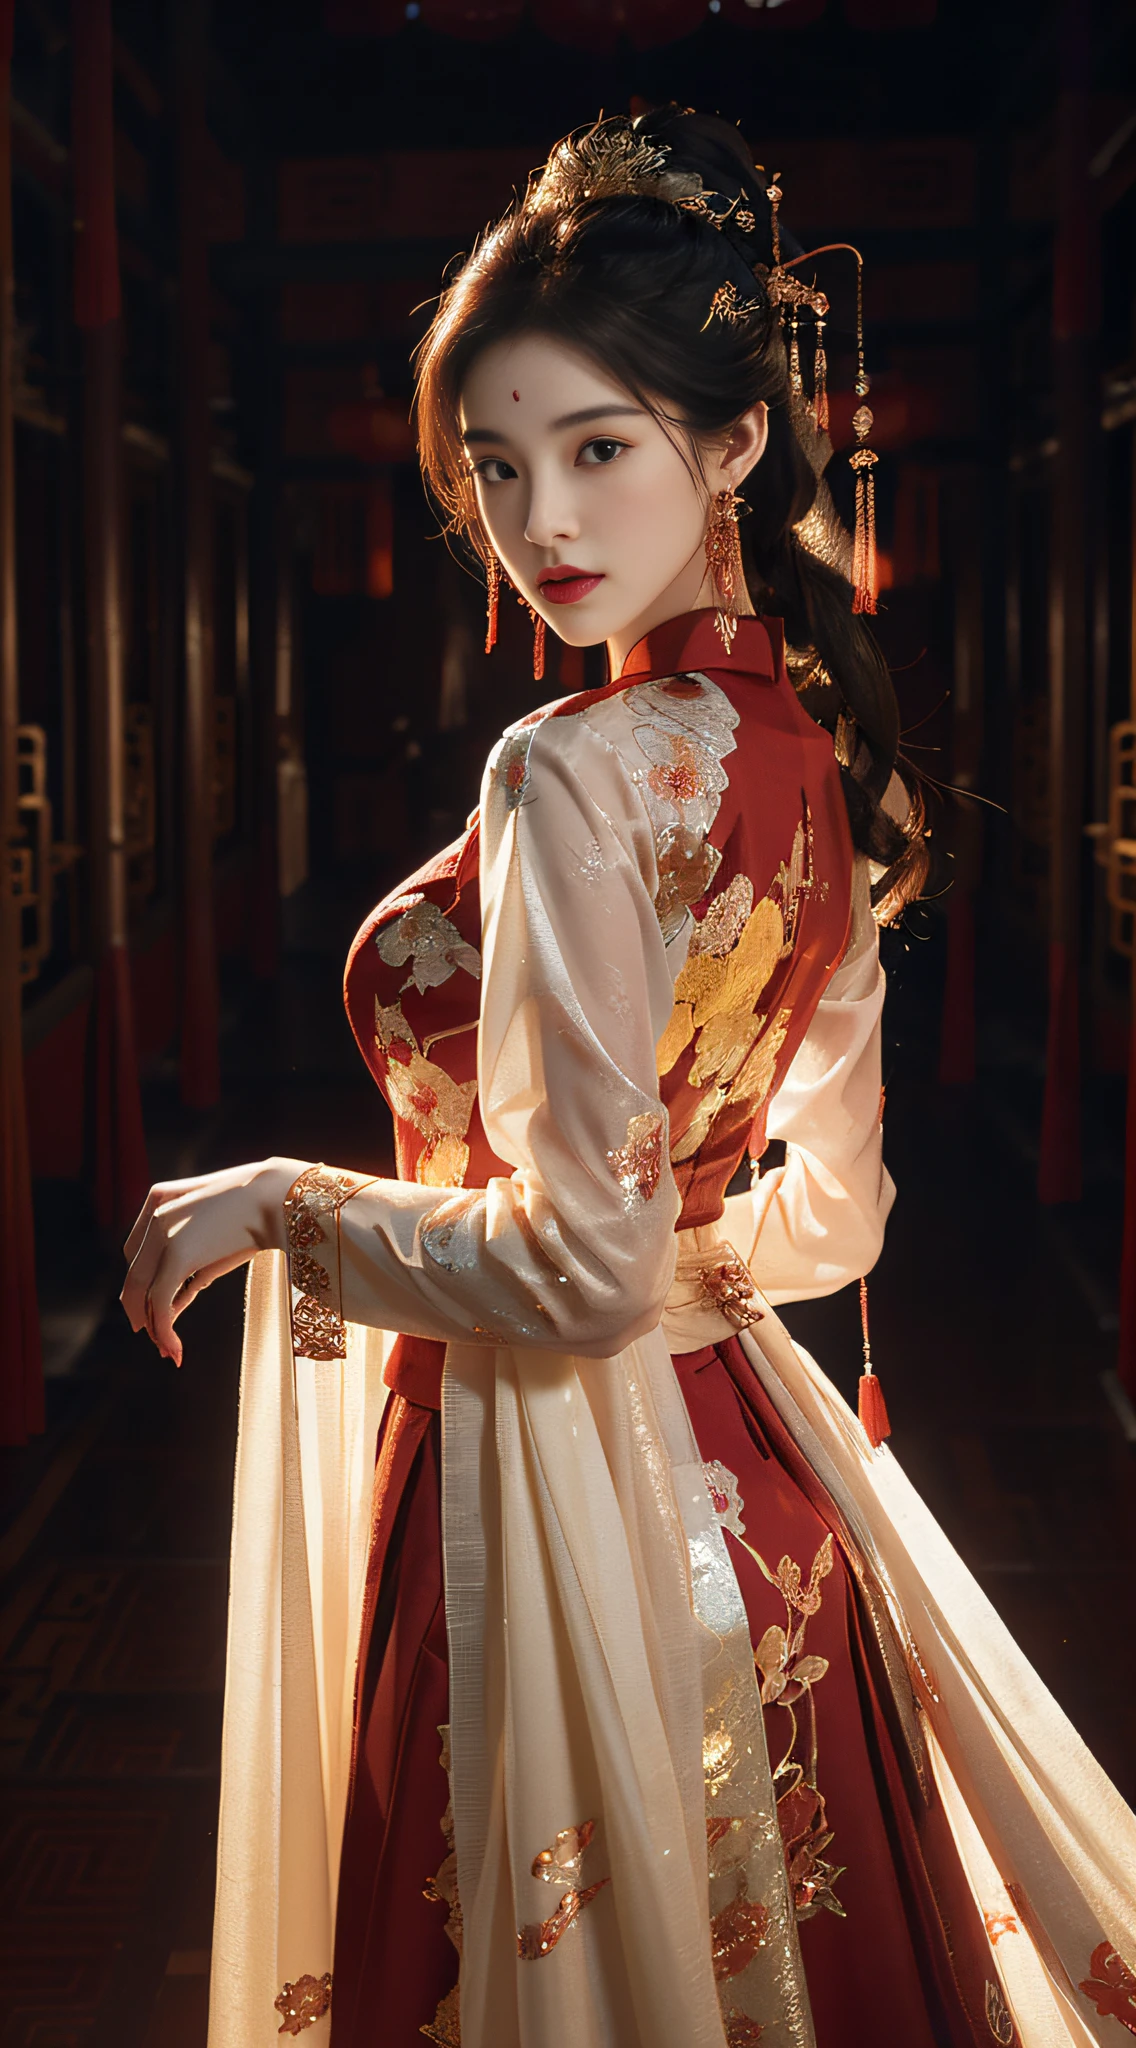 （abstract artistic：1.4）， tmasterpiece， best qualtiy， Ultra-high resolution， big breasts beautiful， Visually stunning， （1girll：1.2）， crimson themed， dark red color， Bleeding red， Halation， looking at viewert
，full bodyesbian，high-heels，woman，nvshen，dunhuang，Hanfu，Red and gold dress,（tmasterpiece，top Quority，best qualtiy，offcial art，Beauty and aesthetics：1.2），Charming mature woman，The is very detailed，（s fractal art：1.1），（a color：1.1）（blossoms：1.3），Most detailed，（ zentangle:1.2), (Dynamic pose), (abstract backgrounds:1.3), (Chinese Traditional Cloth:1.2), (Shiny skin), (many color:1.4), ,(Earrings:1.4),（（fashion icon|Fashionistas|1 Fashionista（individually）|trendsetter|Mannequin）），Ancient Chinese clothing， full bodyesbian， rays of sunshine， Clear face，((best qualtiy)), ((tmasterpiece)), (the detail:1.4), hdr（HighDynamicRange）,Ray traching,nvidia RTX,Hyper-Resolution,Unreal 5,Subsurface scattering、PBR Texture、post-proces、Anisotropy Filtering、((Best quality)), ((Masterpiece)), (Highly detailed:1.3),Masterpiece, Best quality, Translucent skin, （tmasterpiece，best qualtiy，realisticlying：1.37），（Complex and sophisticated，Highly detailed skin and face），（Complex and sophisticated，high detailed hand）， Clear face， tmasterpiece， super detailing， Epic composition， hyper HD， high qulity， extremely detaile， offcial art， Uniform 8K wallpaper， super detailing，High resolution CG，depth of fieldaximum definition and sharpnesany-Layer Textures、Albedo and Specular maps、Surface coloring、Accurate simulation of light-material interactions、rendering by octane、Two-colored light、largeaperture、Low ISO、White balance、the rule of thirds、8K raw data，Little ass，,long leges,Little ass,Indifferent eyes,Realistic art,Dominatrix,femdom,high ponytails，high and cold，A look of contempt，180cm tall